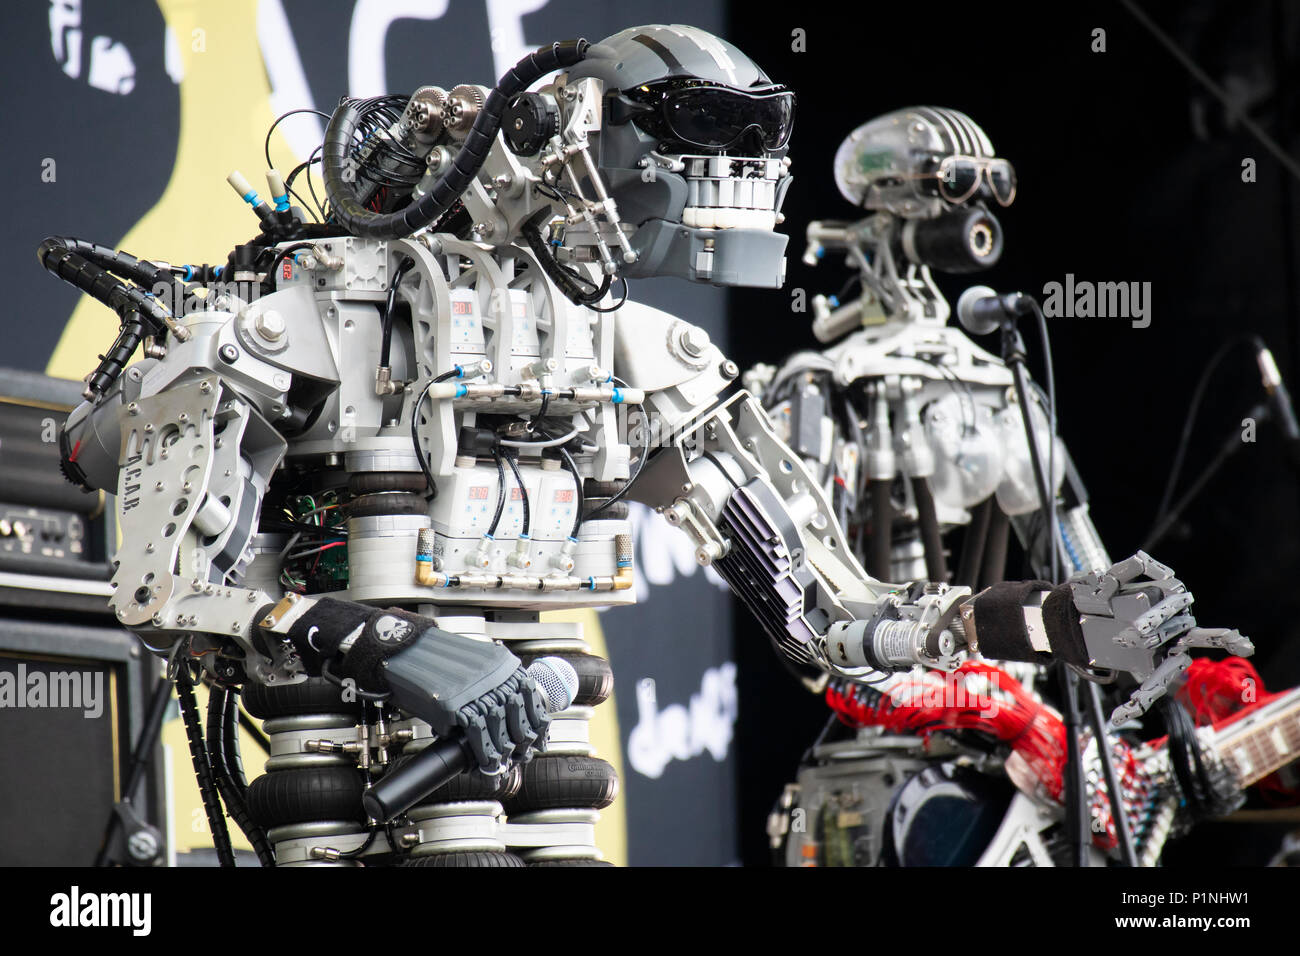 Hannover, Germany. 12th June, 2018. Robot band Compressorhead (here robots  Mega-Wattson and Hellga Tarr) - based in Berlin and playing on real musical  instruments - is performing live at CEBIT 2018, international